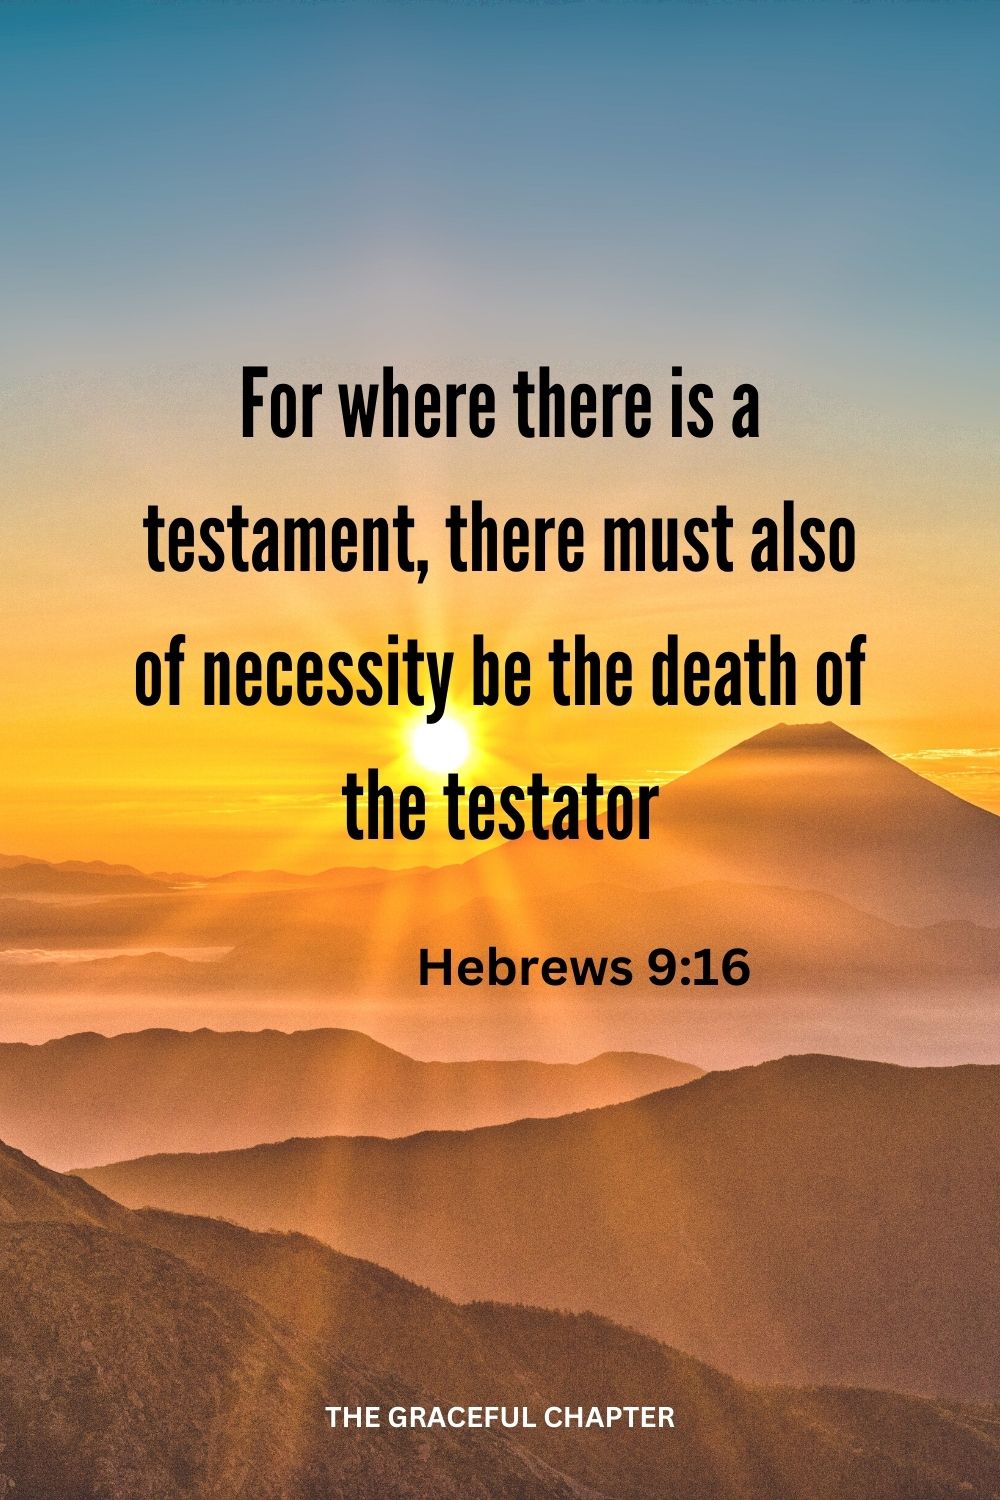 For where there is a testament, there must also of necessity be the death of the testator. Hebrews 9:16